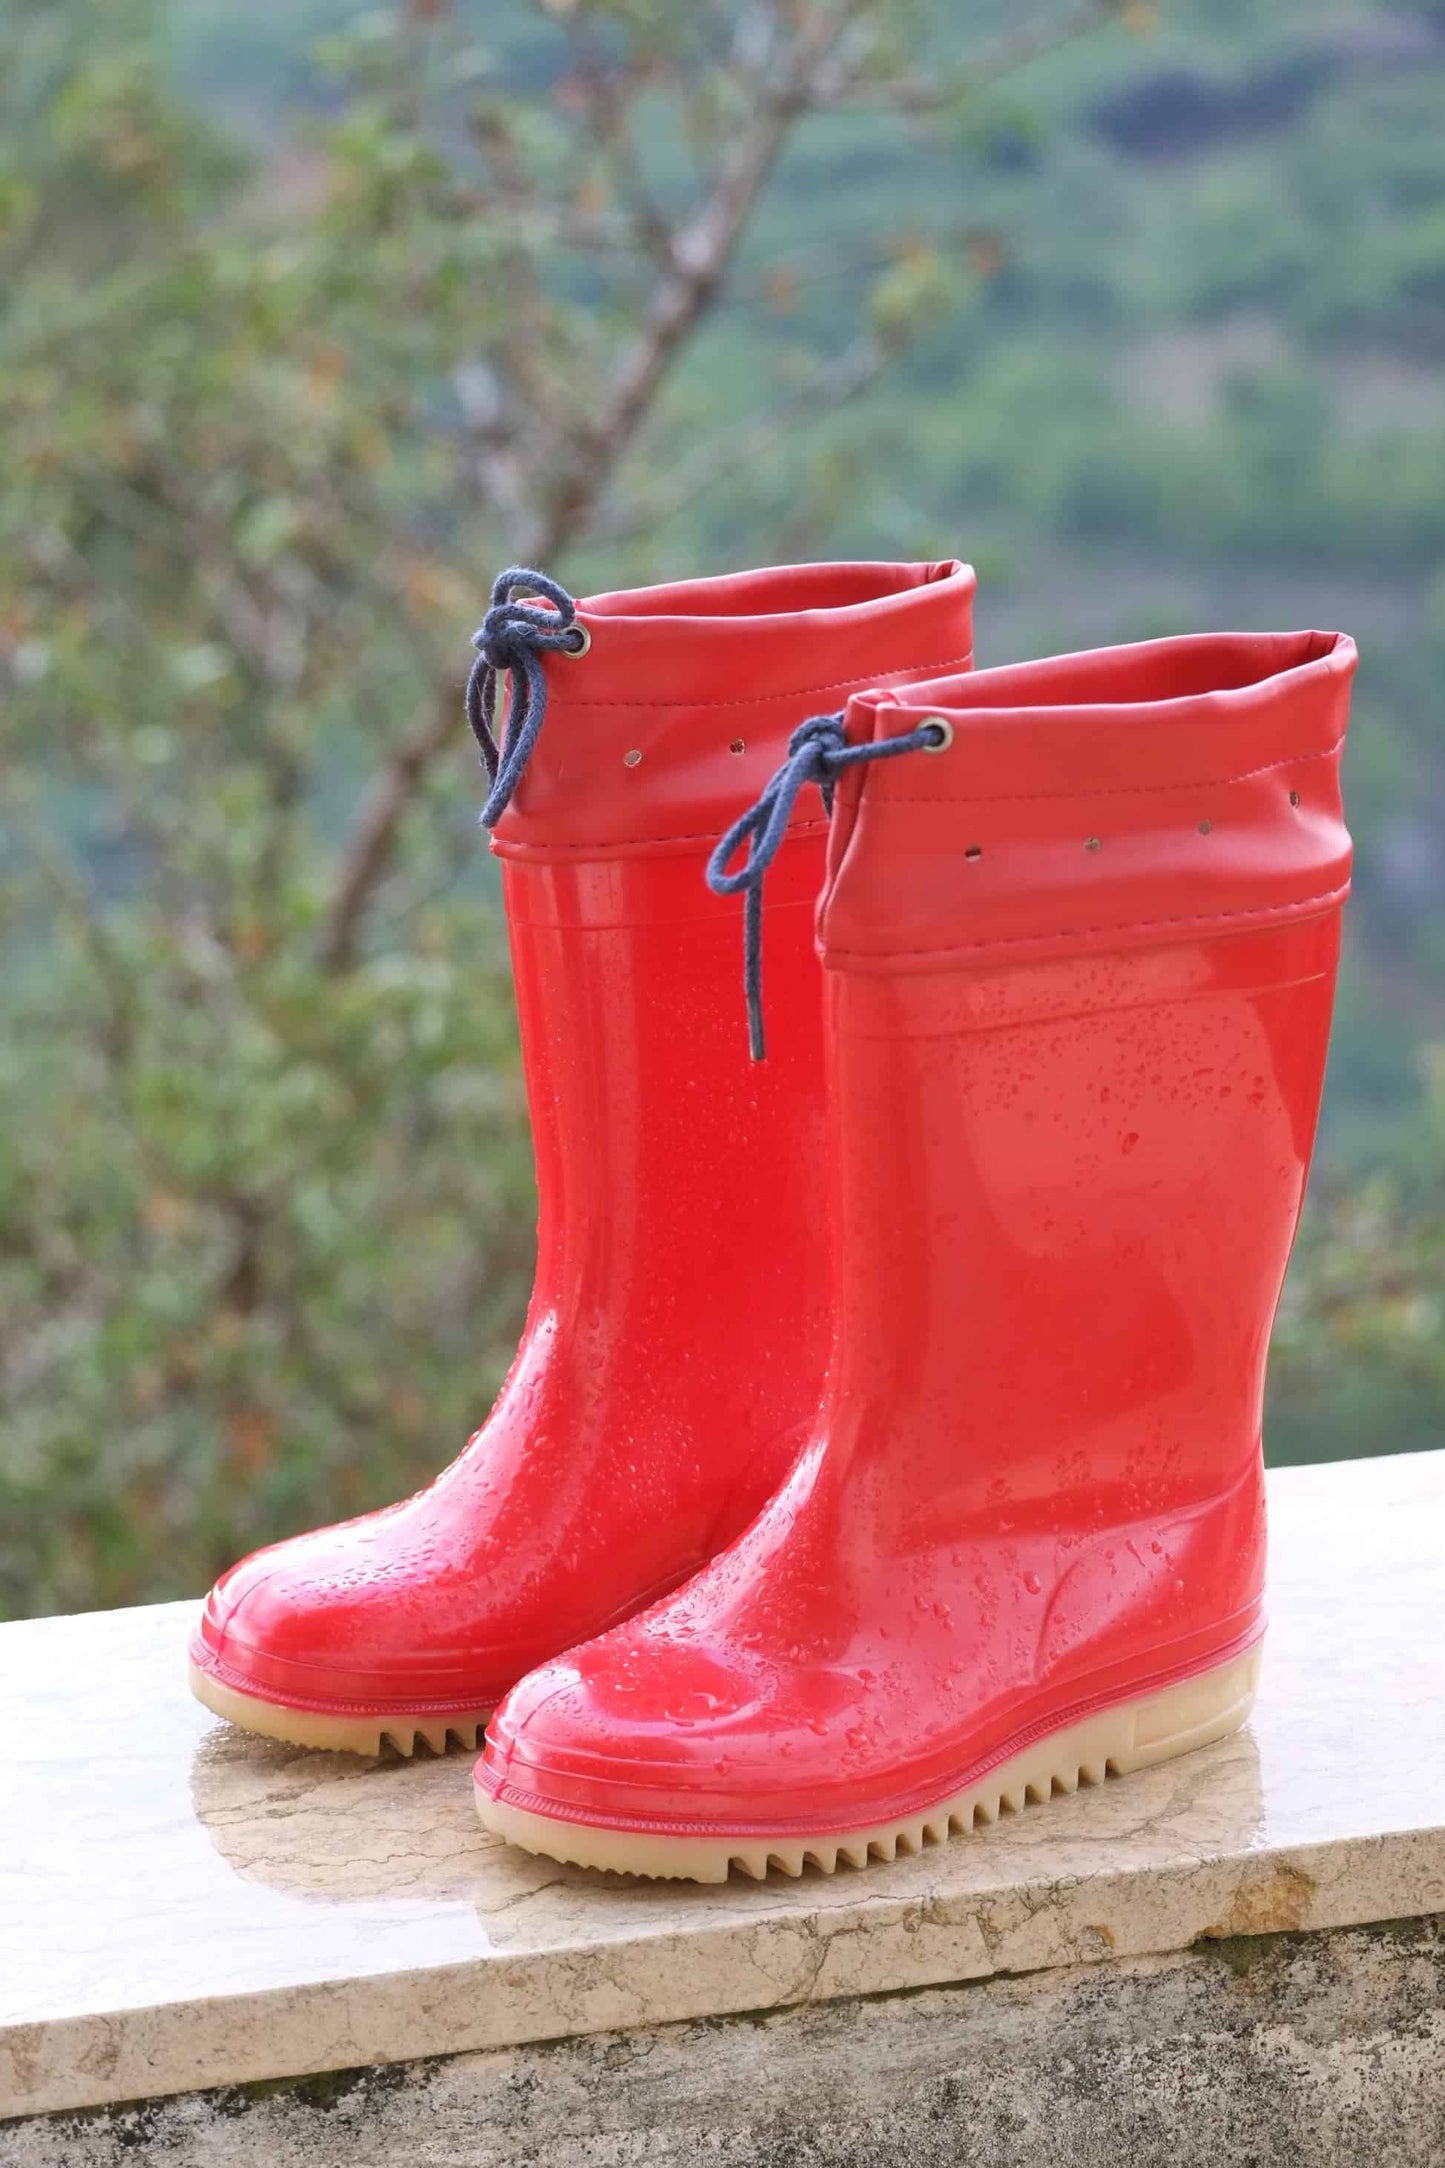 Red ROMIKA Bobby Rain Boots on a ledge and covered in rain drops